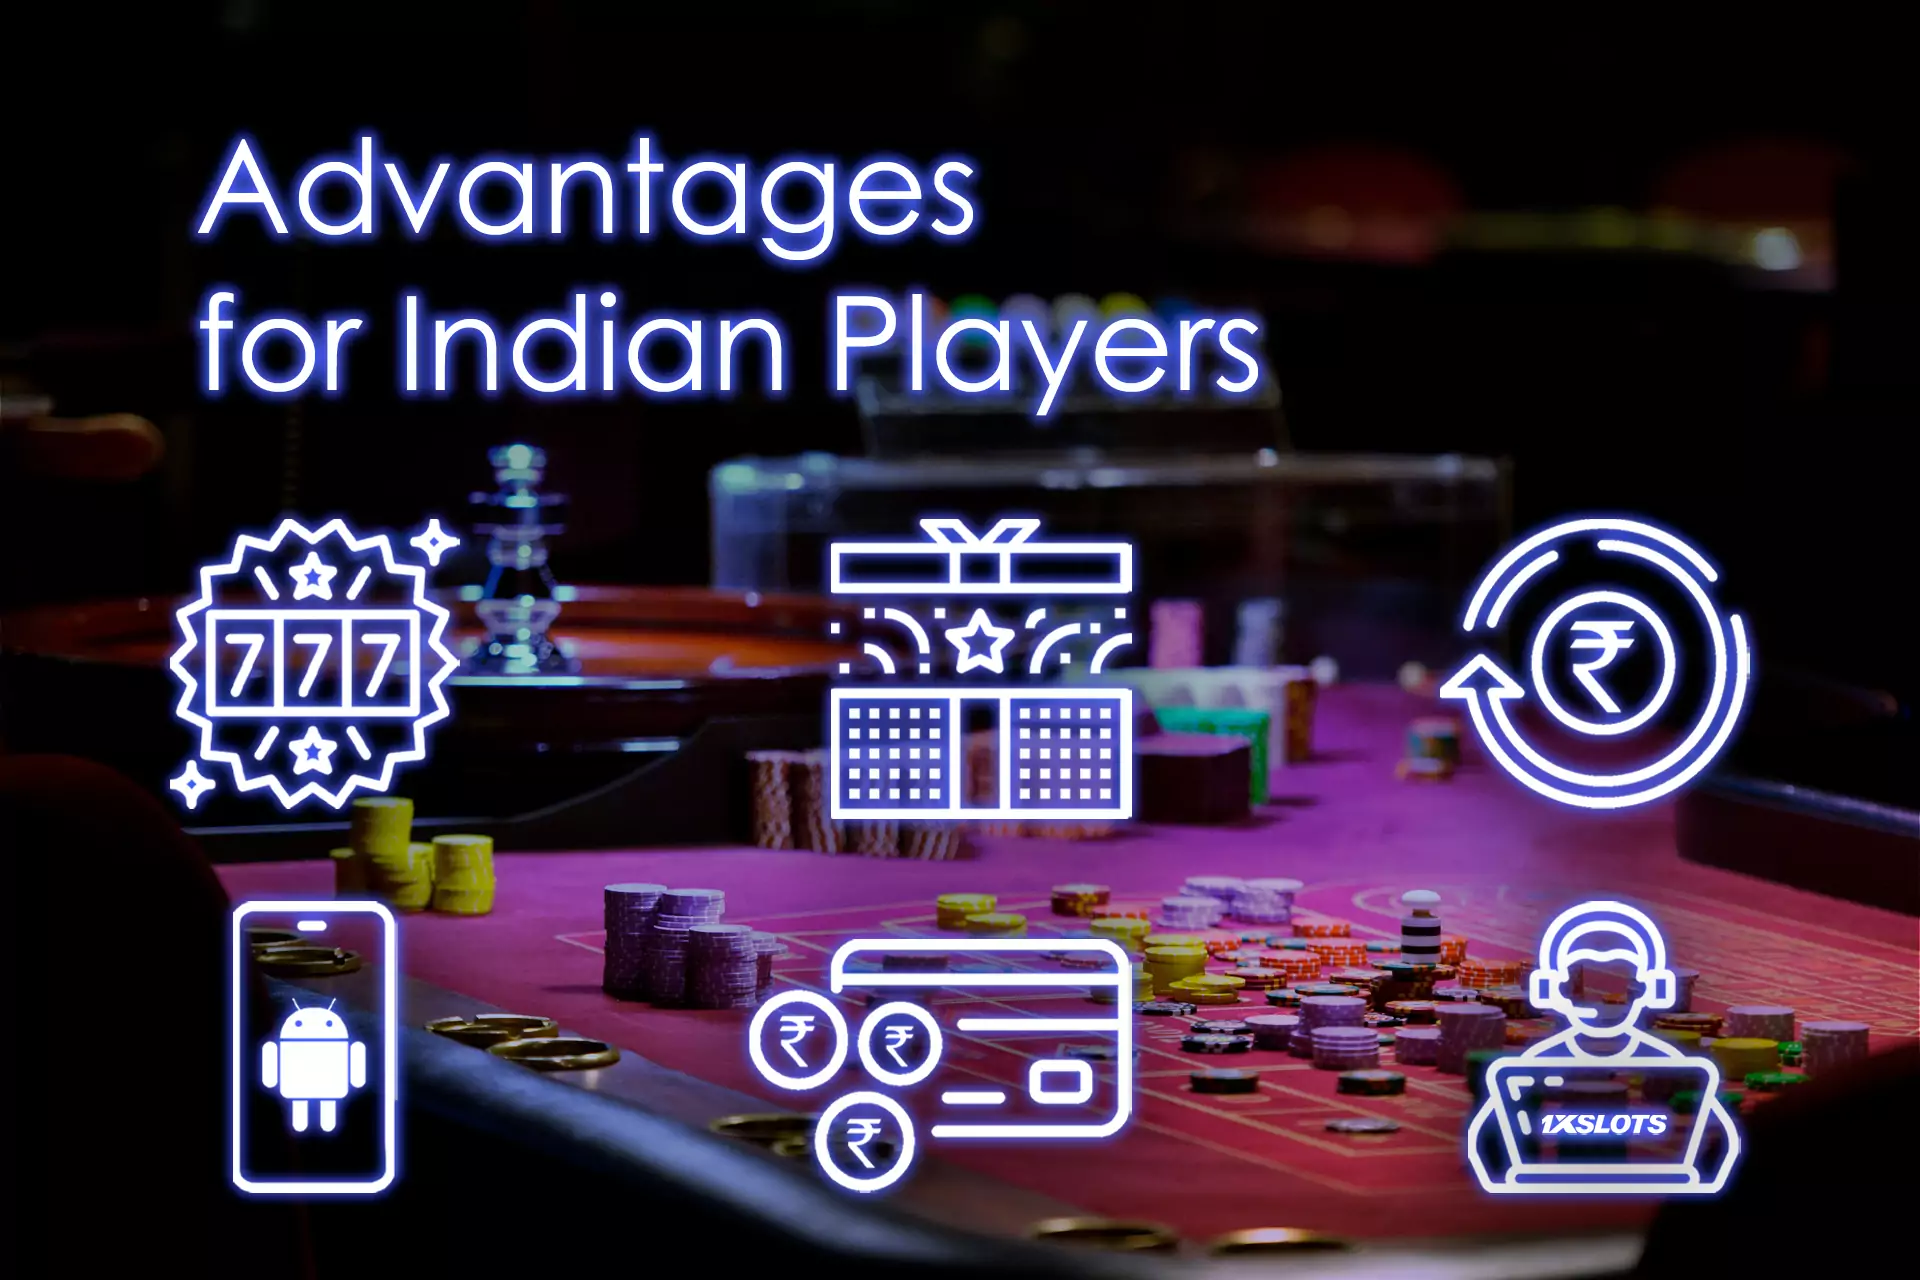 Players from India admit a huge welcome offer, a well-done app for Android, and a 24/7 support service.